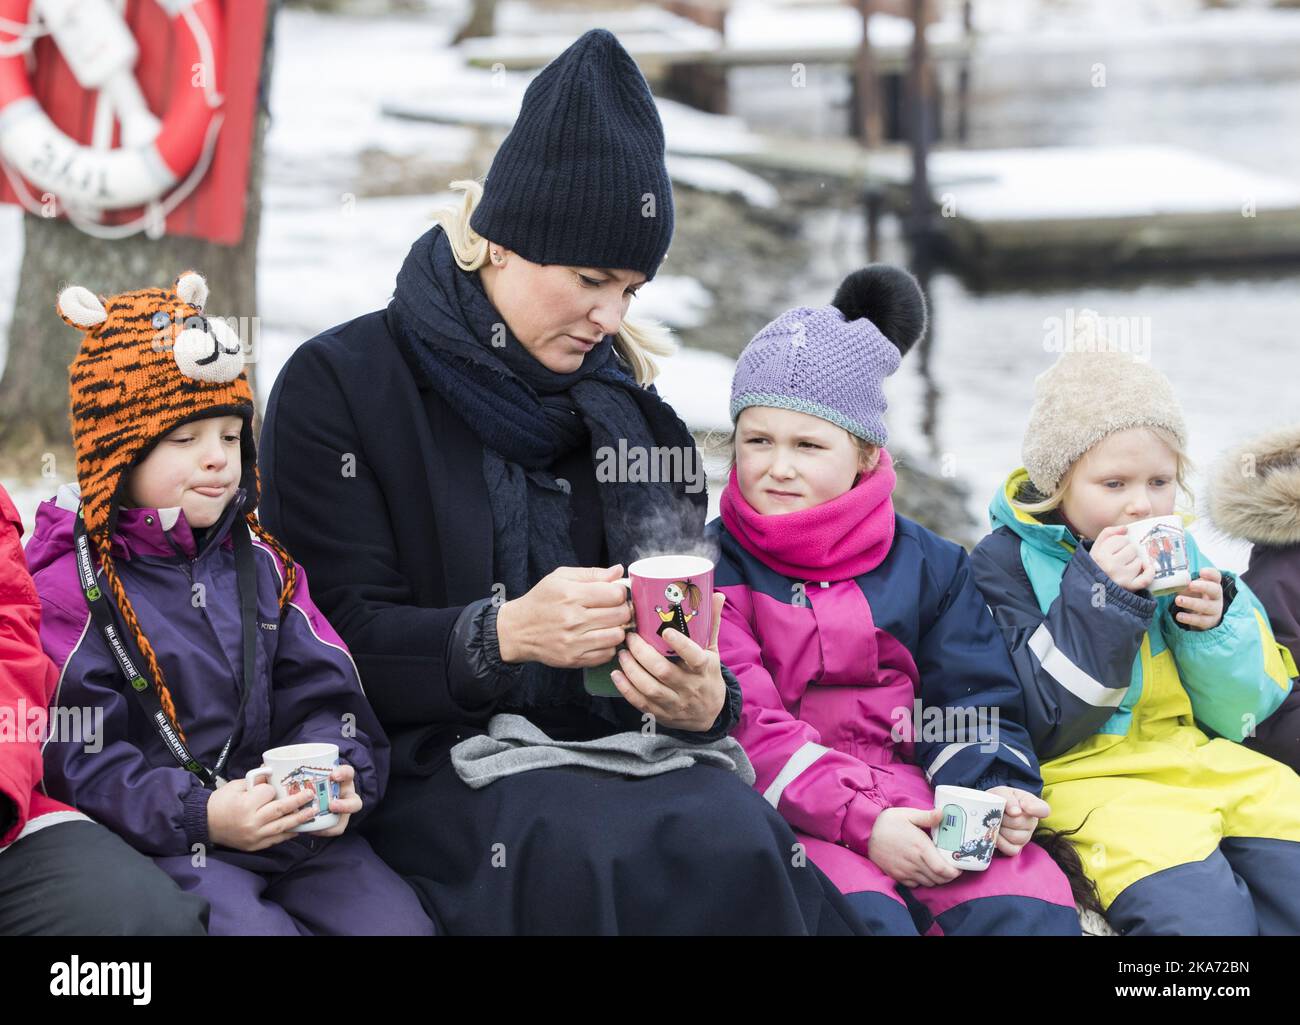 FREDRIKSTAD, Norway 20180215. Crown Princess Mette-Marit meets twelve kindergarten children from the Smertulia kindergarten and had ar mug of hot cocoa with them. Crown Princess Mette-Marit got a Moomin mug that she wanted to keep in her office. From left: Marius, Crown Princess Mette-Marit, Le and Andrea. Photo: Berit Roald / NTB scanpix Stock Photo